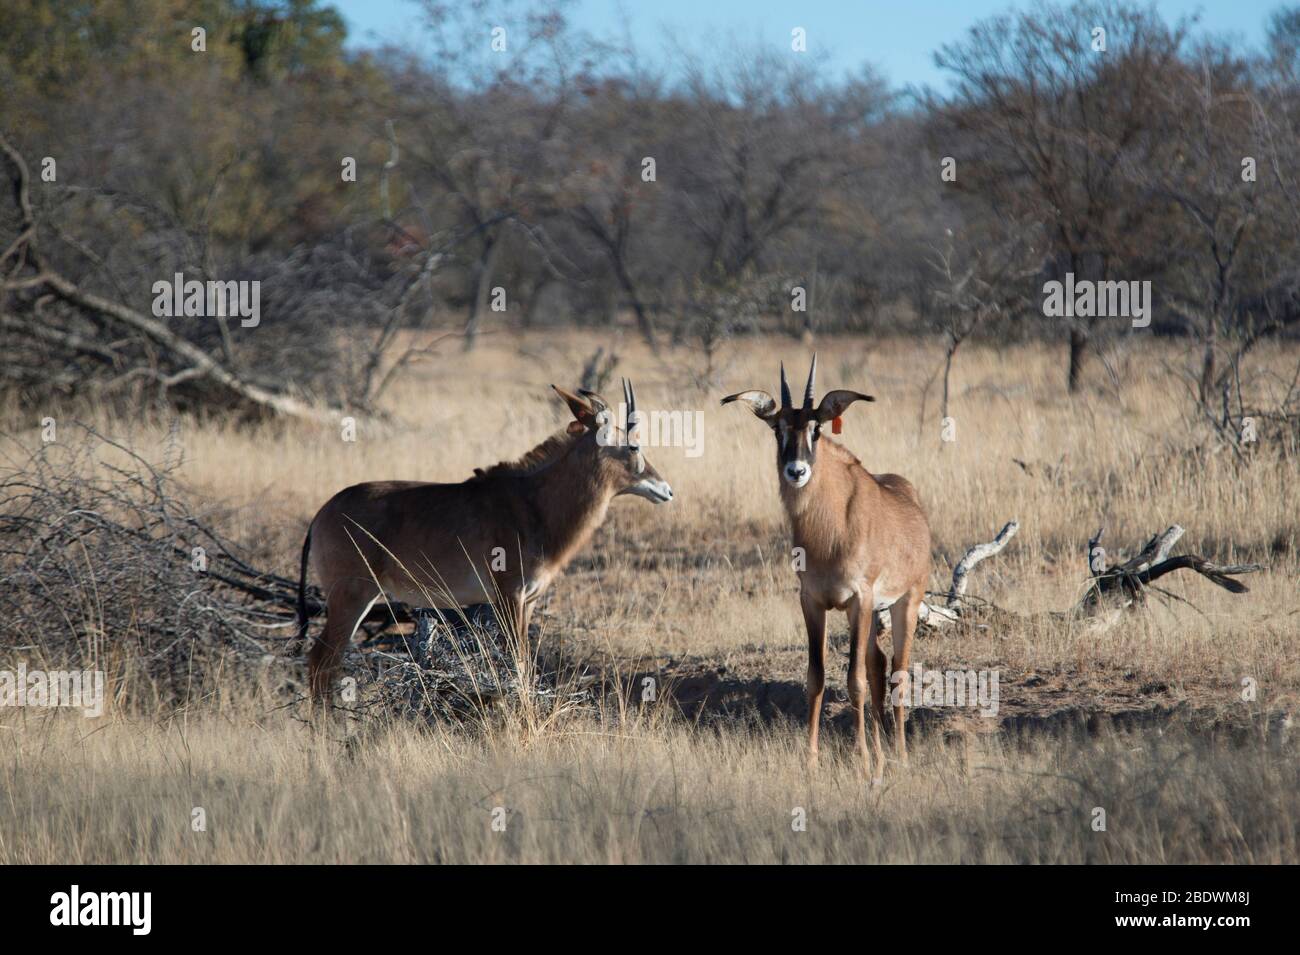 Roan Antelope, Hippotragus equinus, pair with tags, Ant's Hill Reserve, near Vaalwater, Limpopo province, South Africa Stock Photo